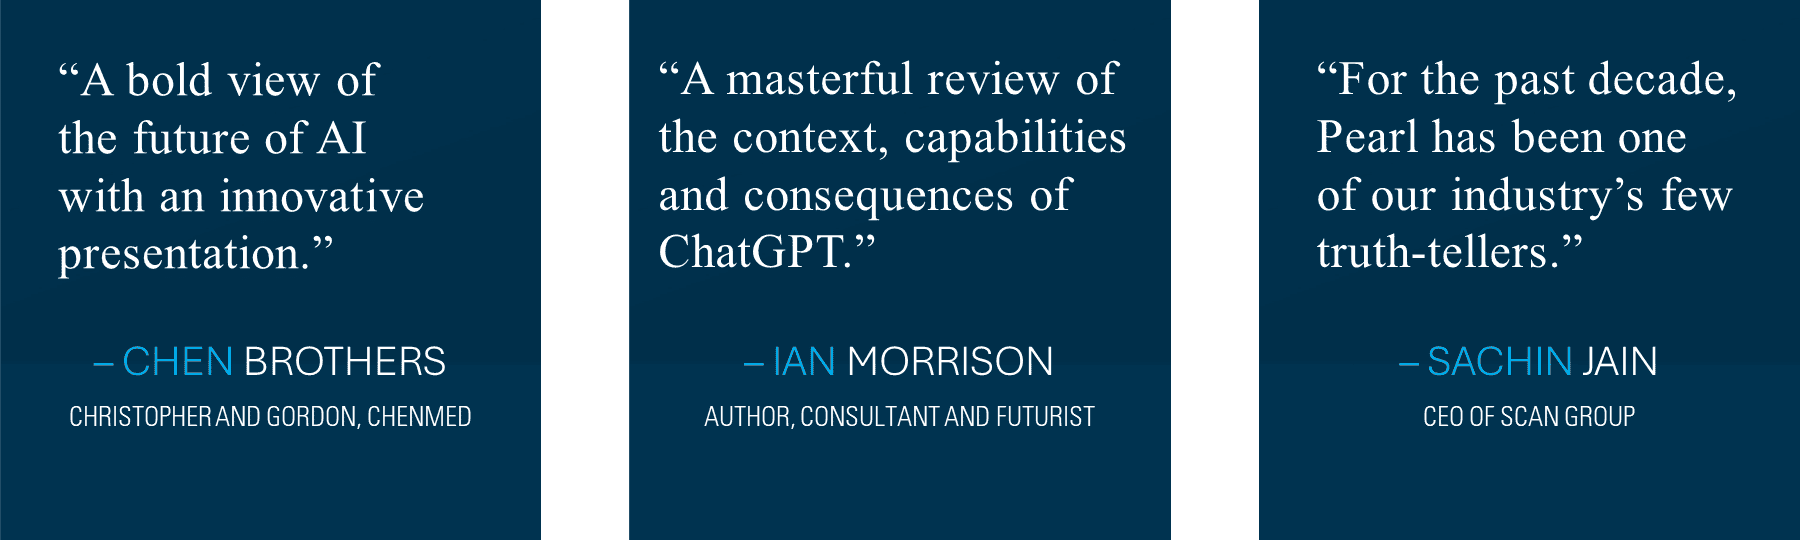 Now it's getting old, right? Soooo much praise for ChatGPT, MD